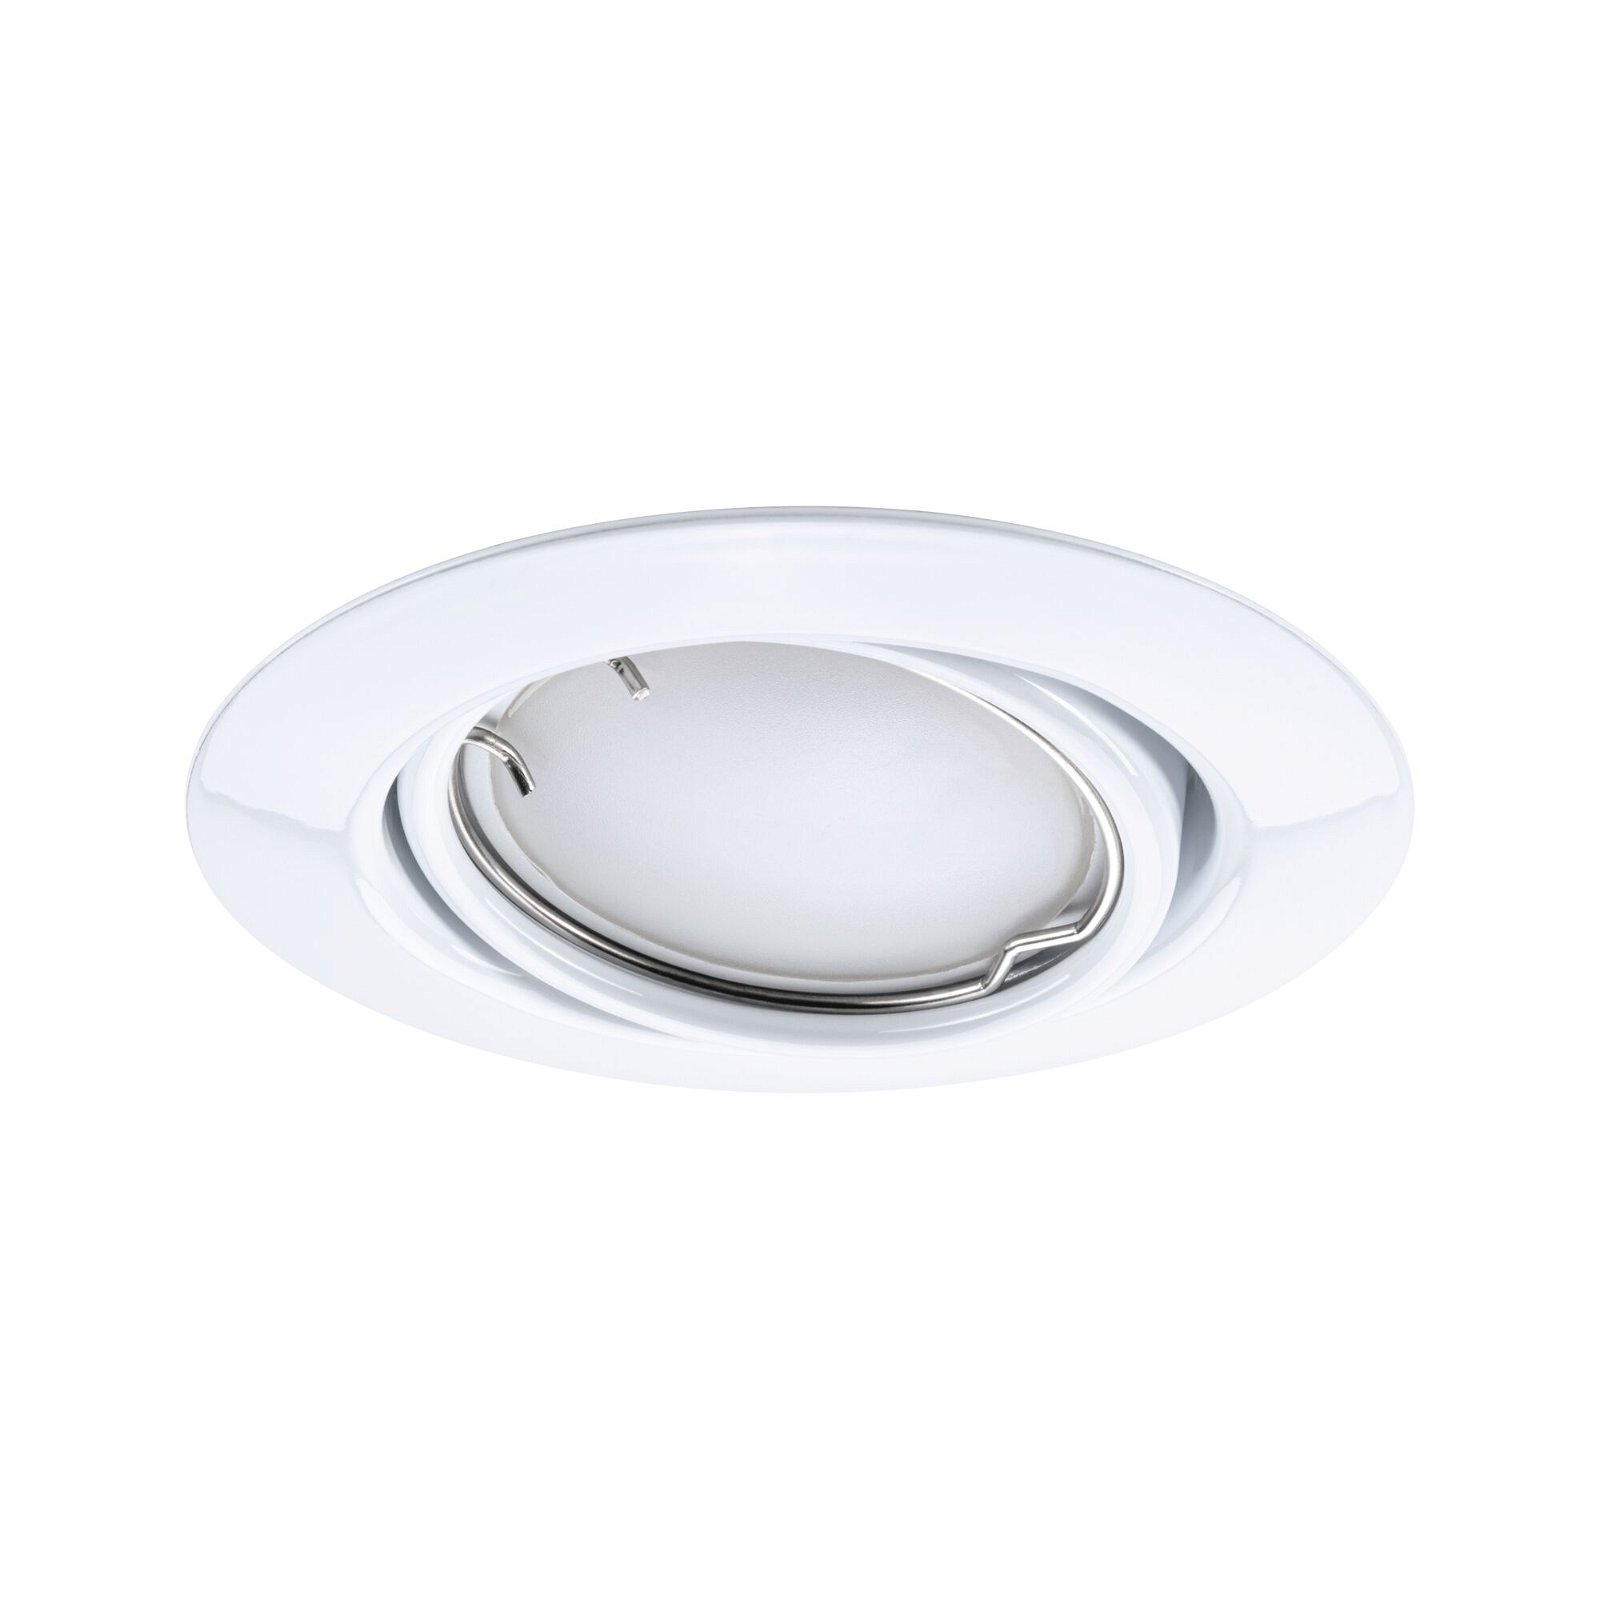 LED Recessed luminaire Smart Home Zigbee 3.0 Base Coin Basic Set Swivelling round 90mm 20° 3x4,9W 3x420lm 230V dimmable RGBW+ White